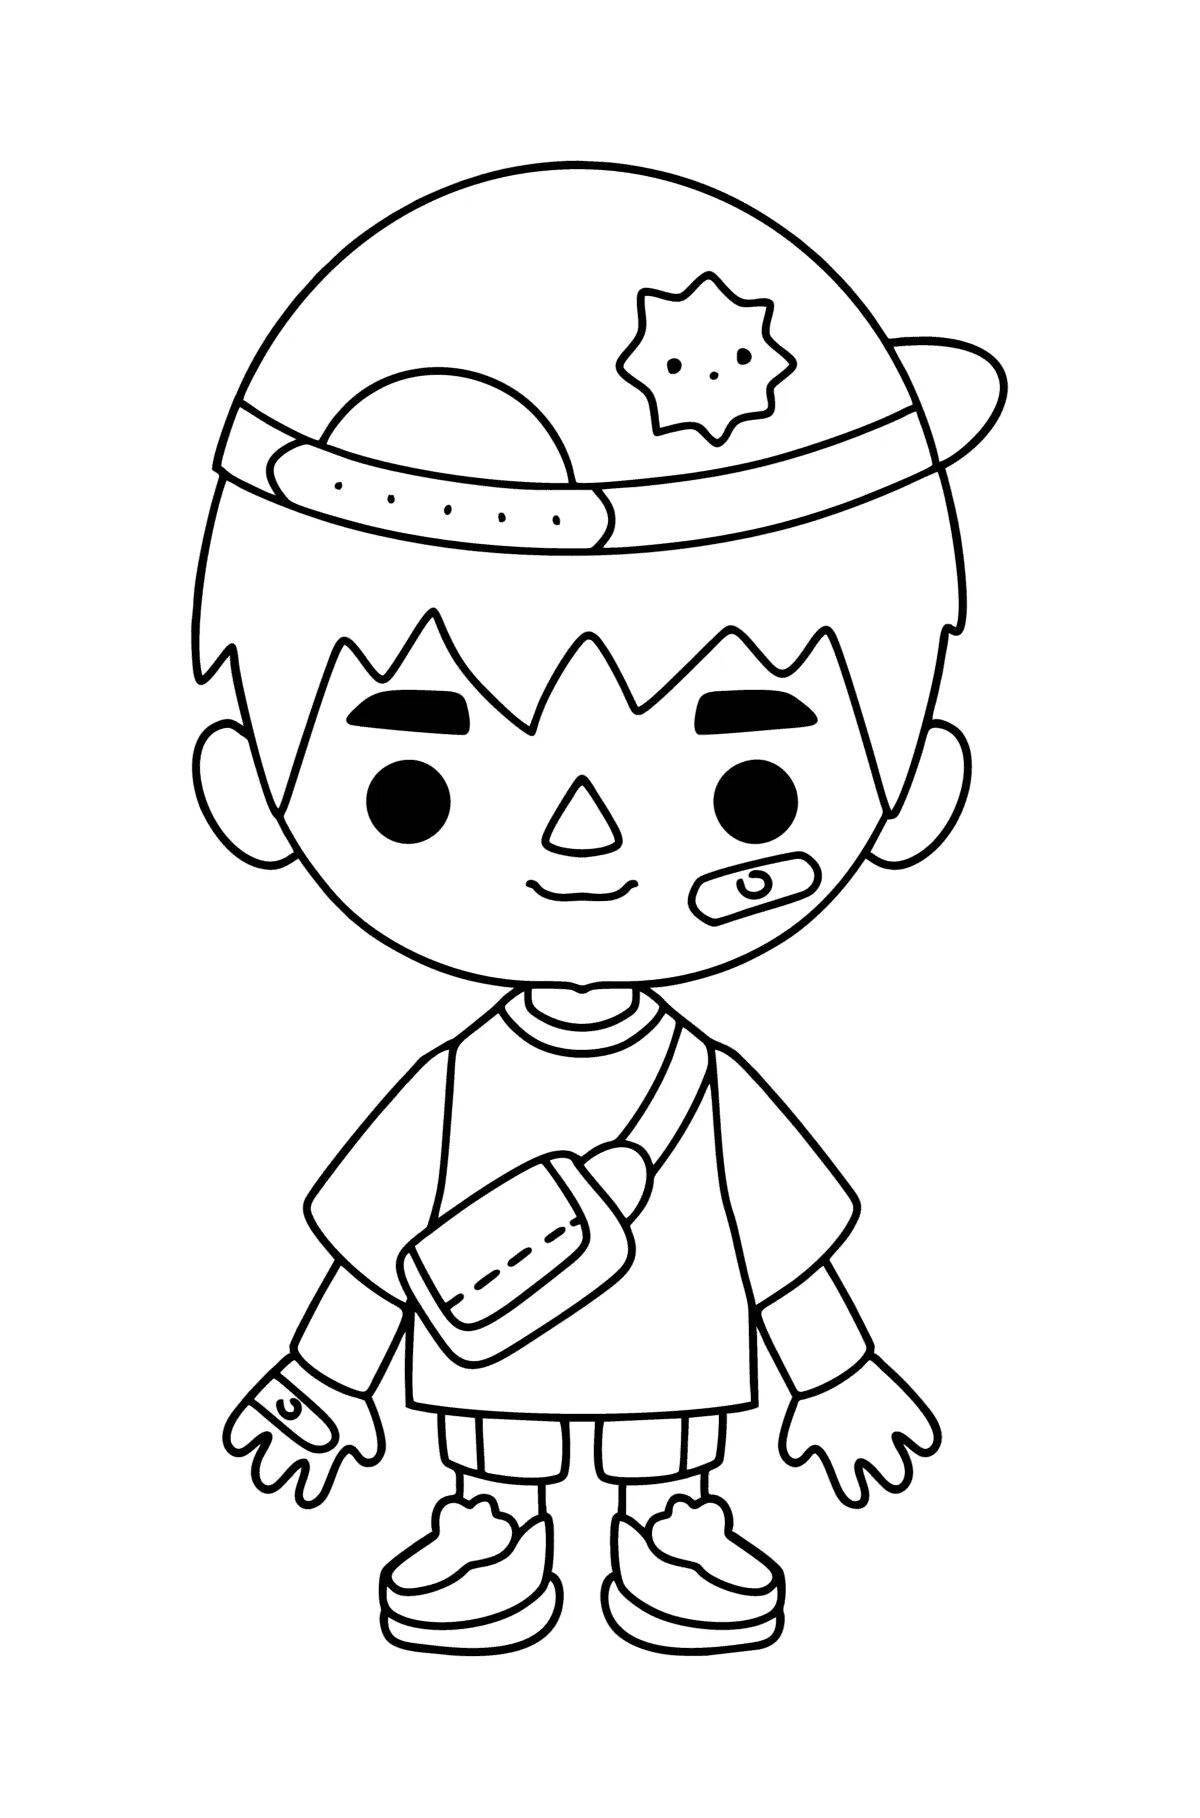 Colorful coloring pages of little men